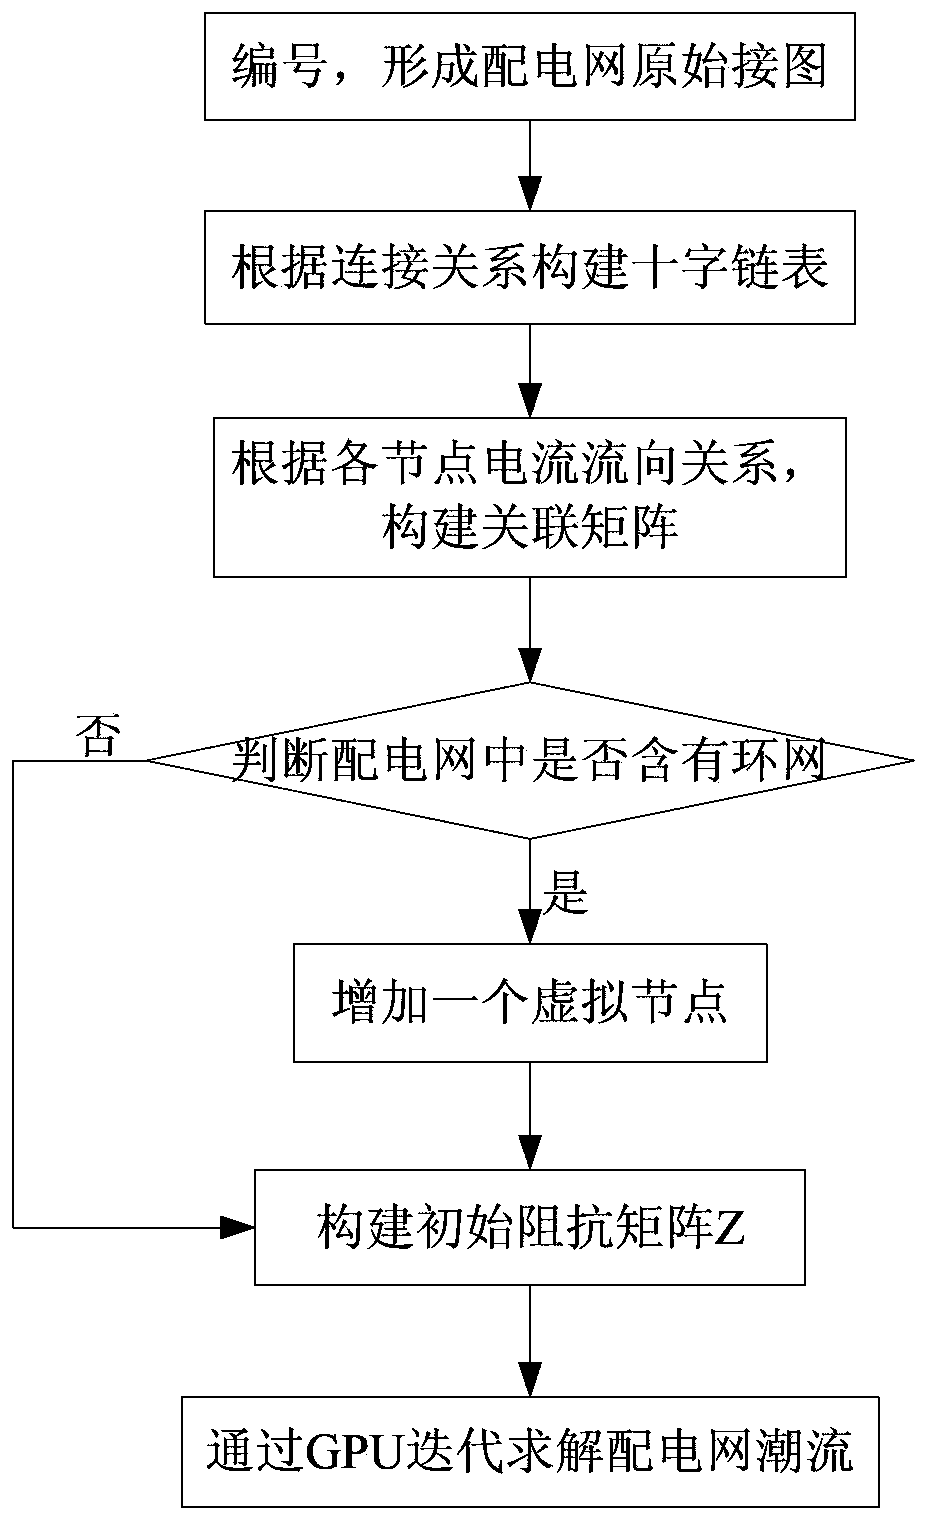 GPU-based computation method for quickly solving power flow in distribution networks